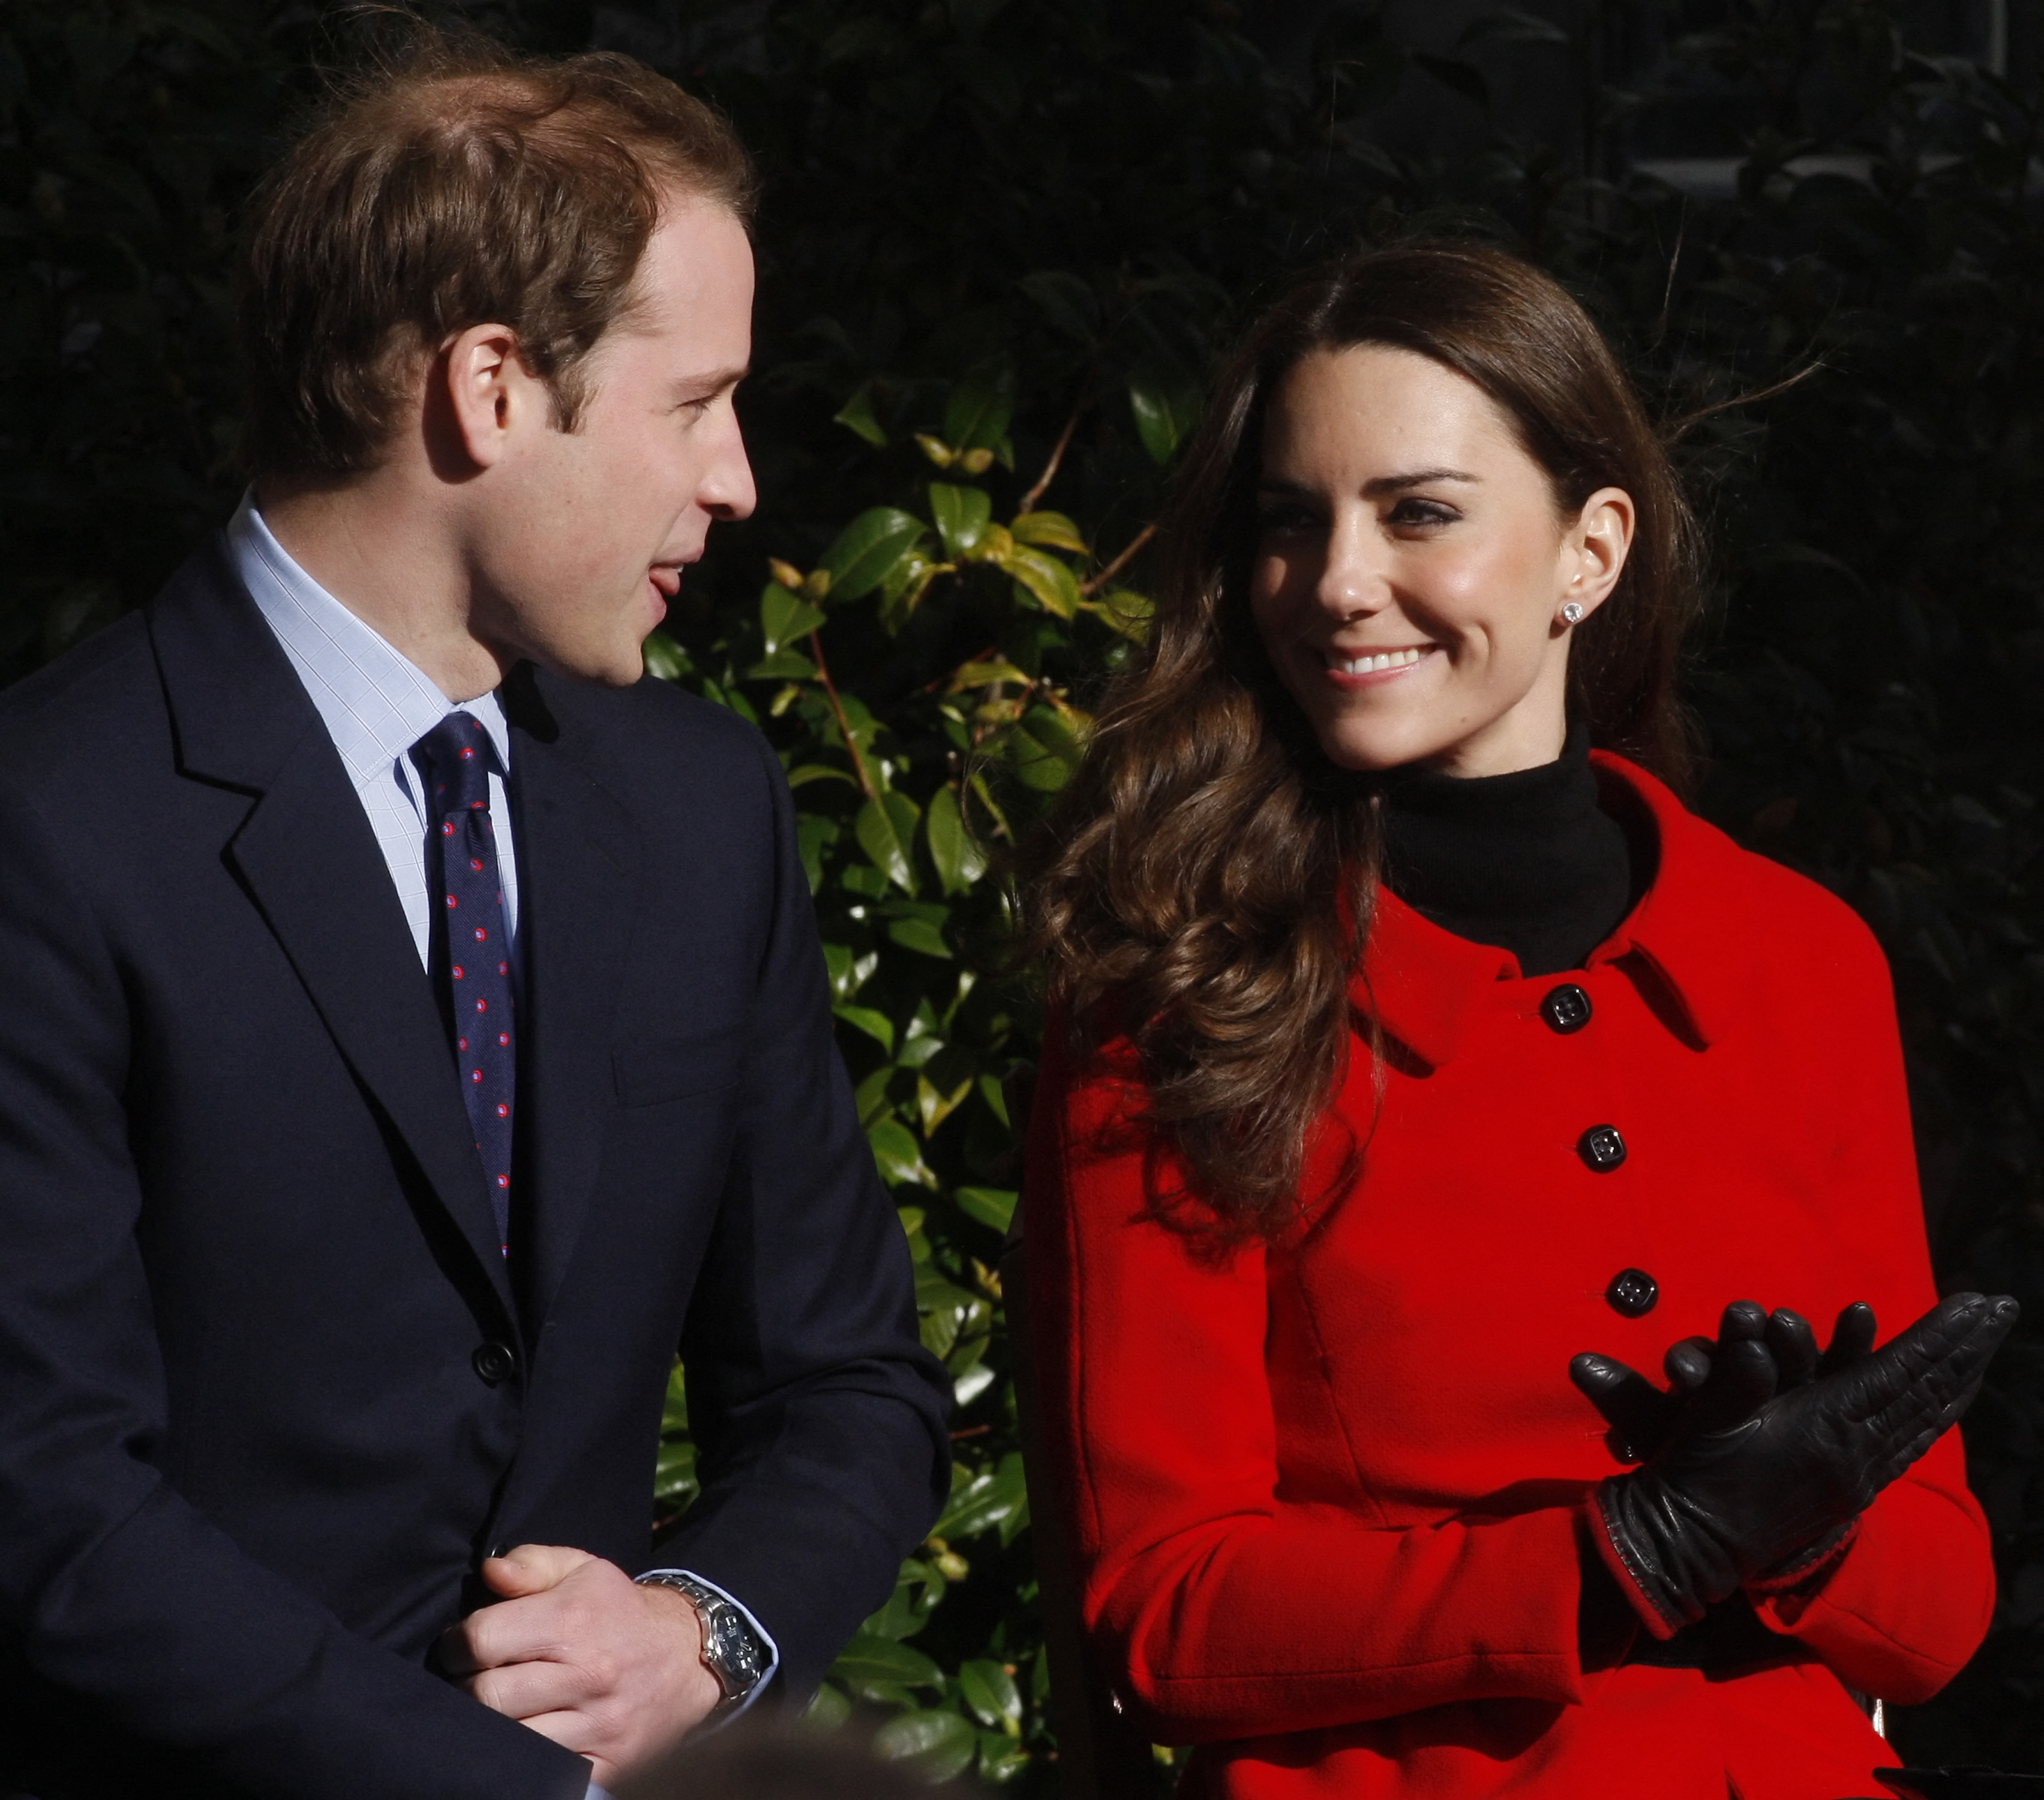 Prince William and Kate Middleton visiting St Andrews University in St. Andrews, Scotland on February 25, 2011 | Source: Getty Images